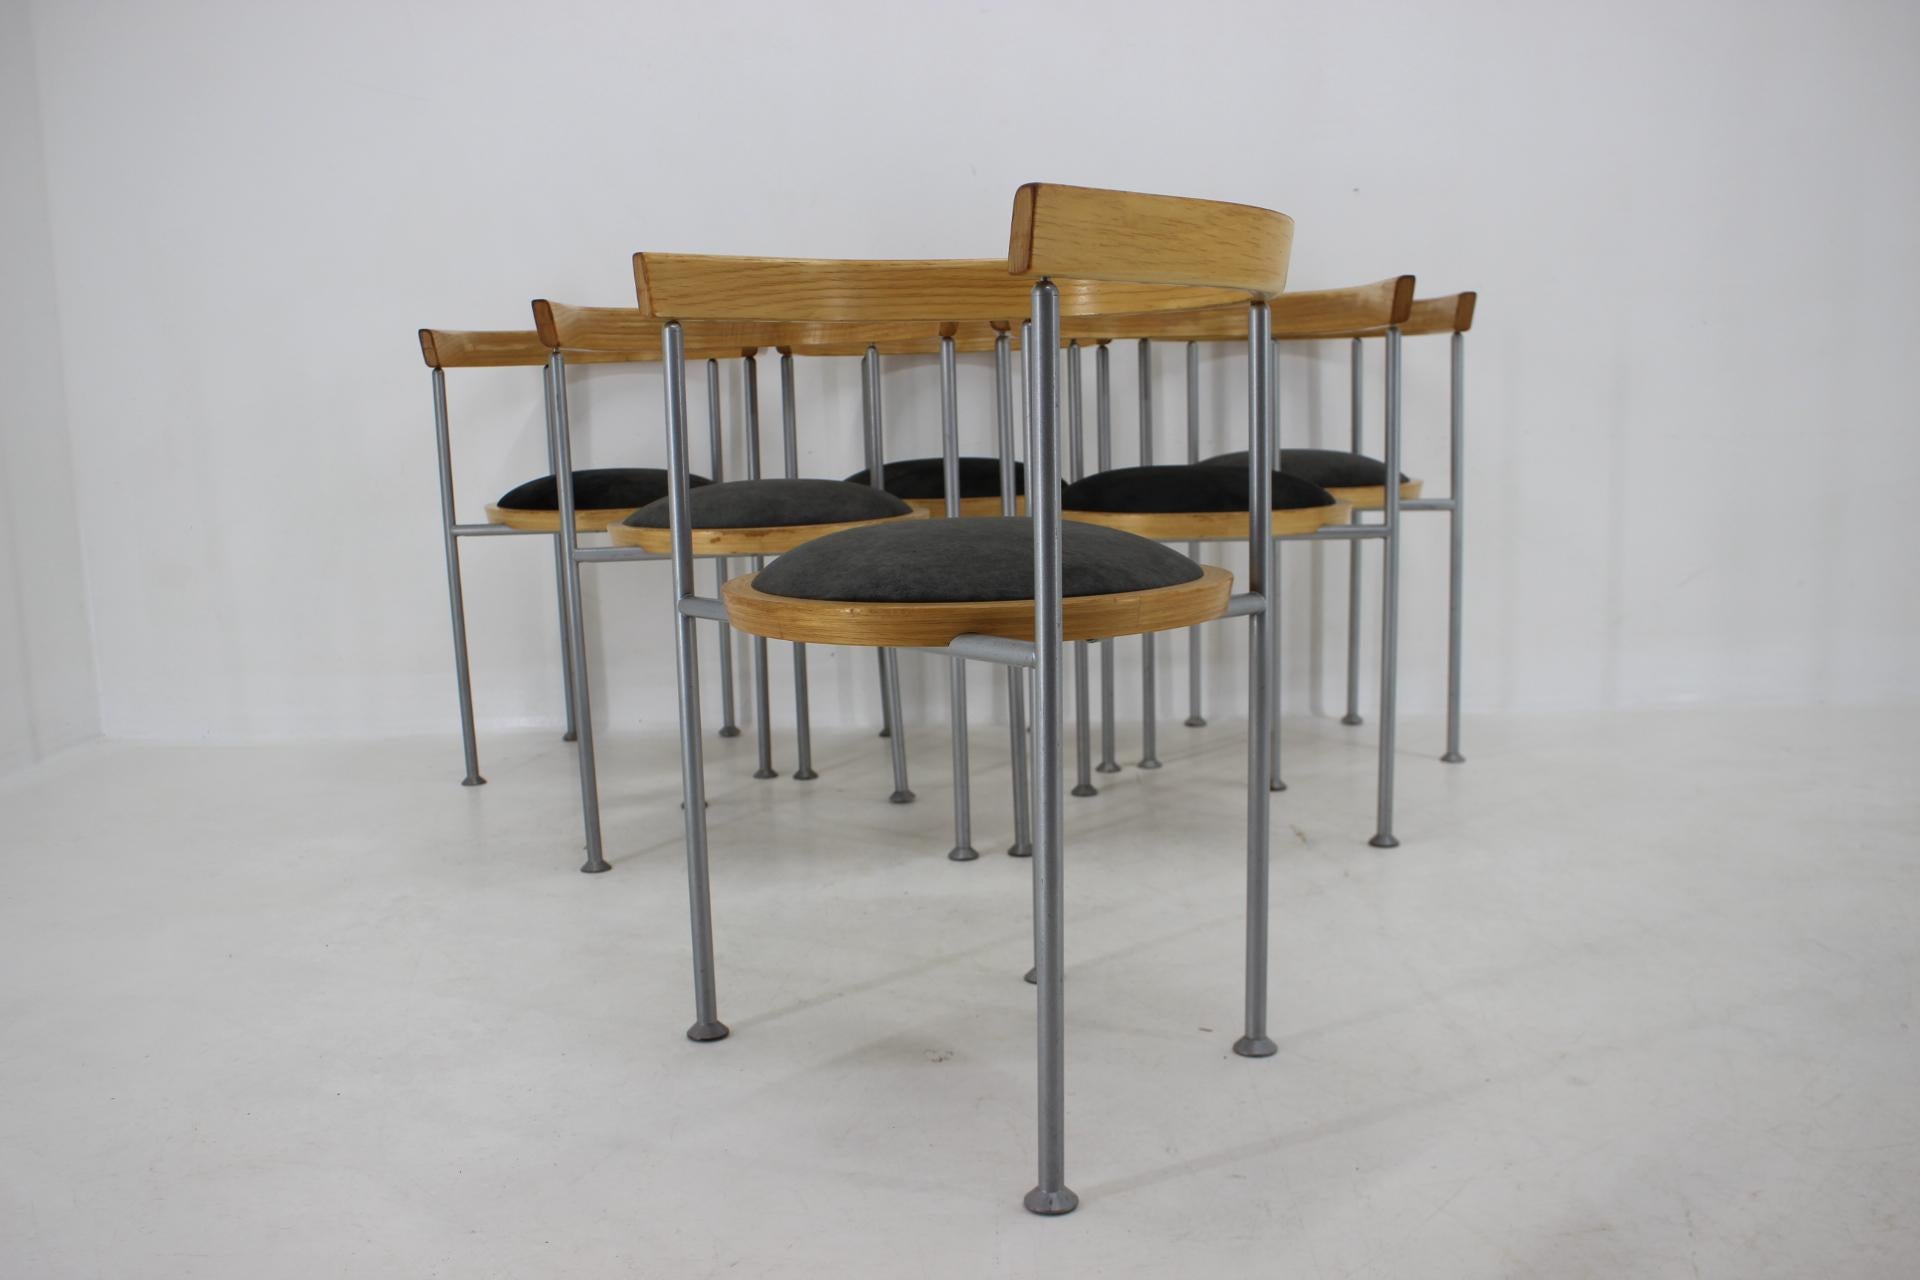 1990s Borge Lindau Set of 6 Dining Chairs for Bla Station, Sweden For Sale 2